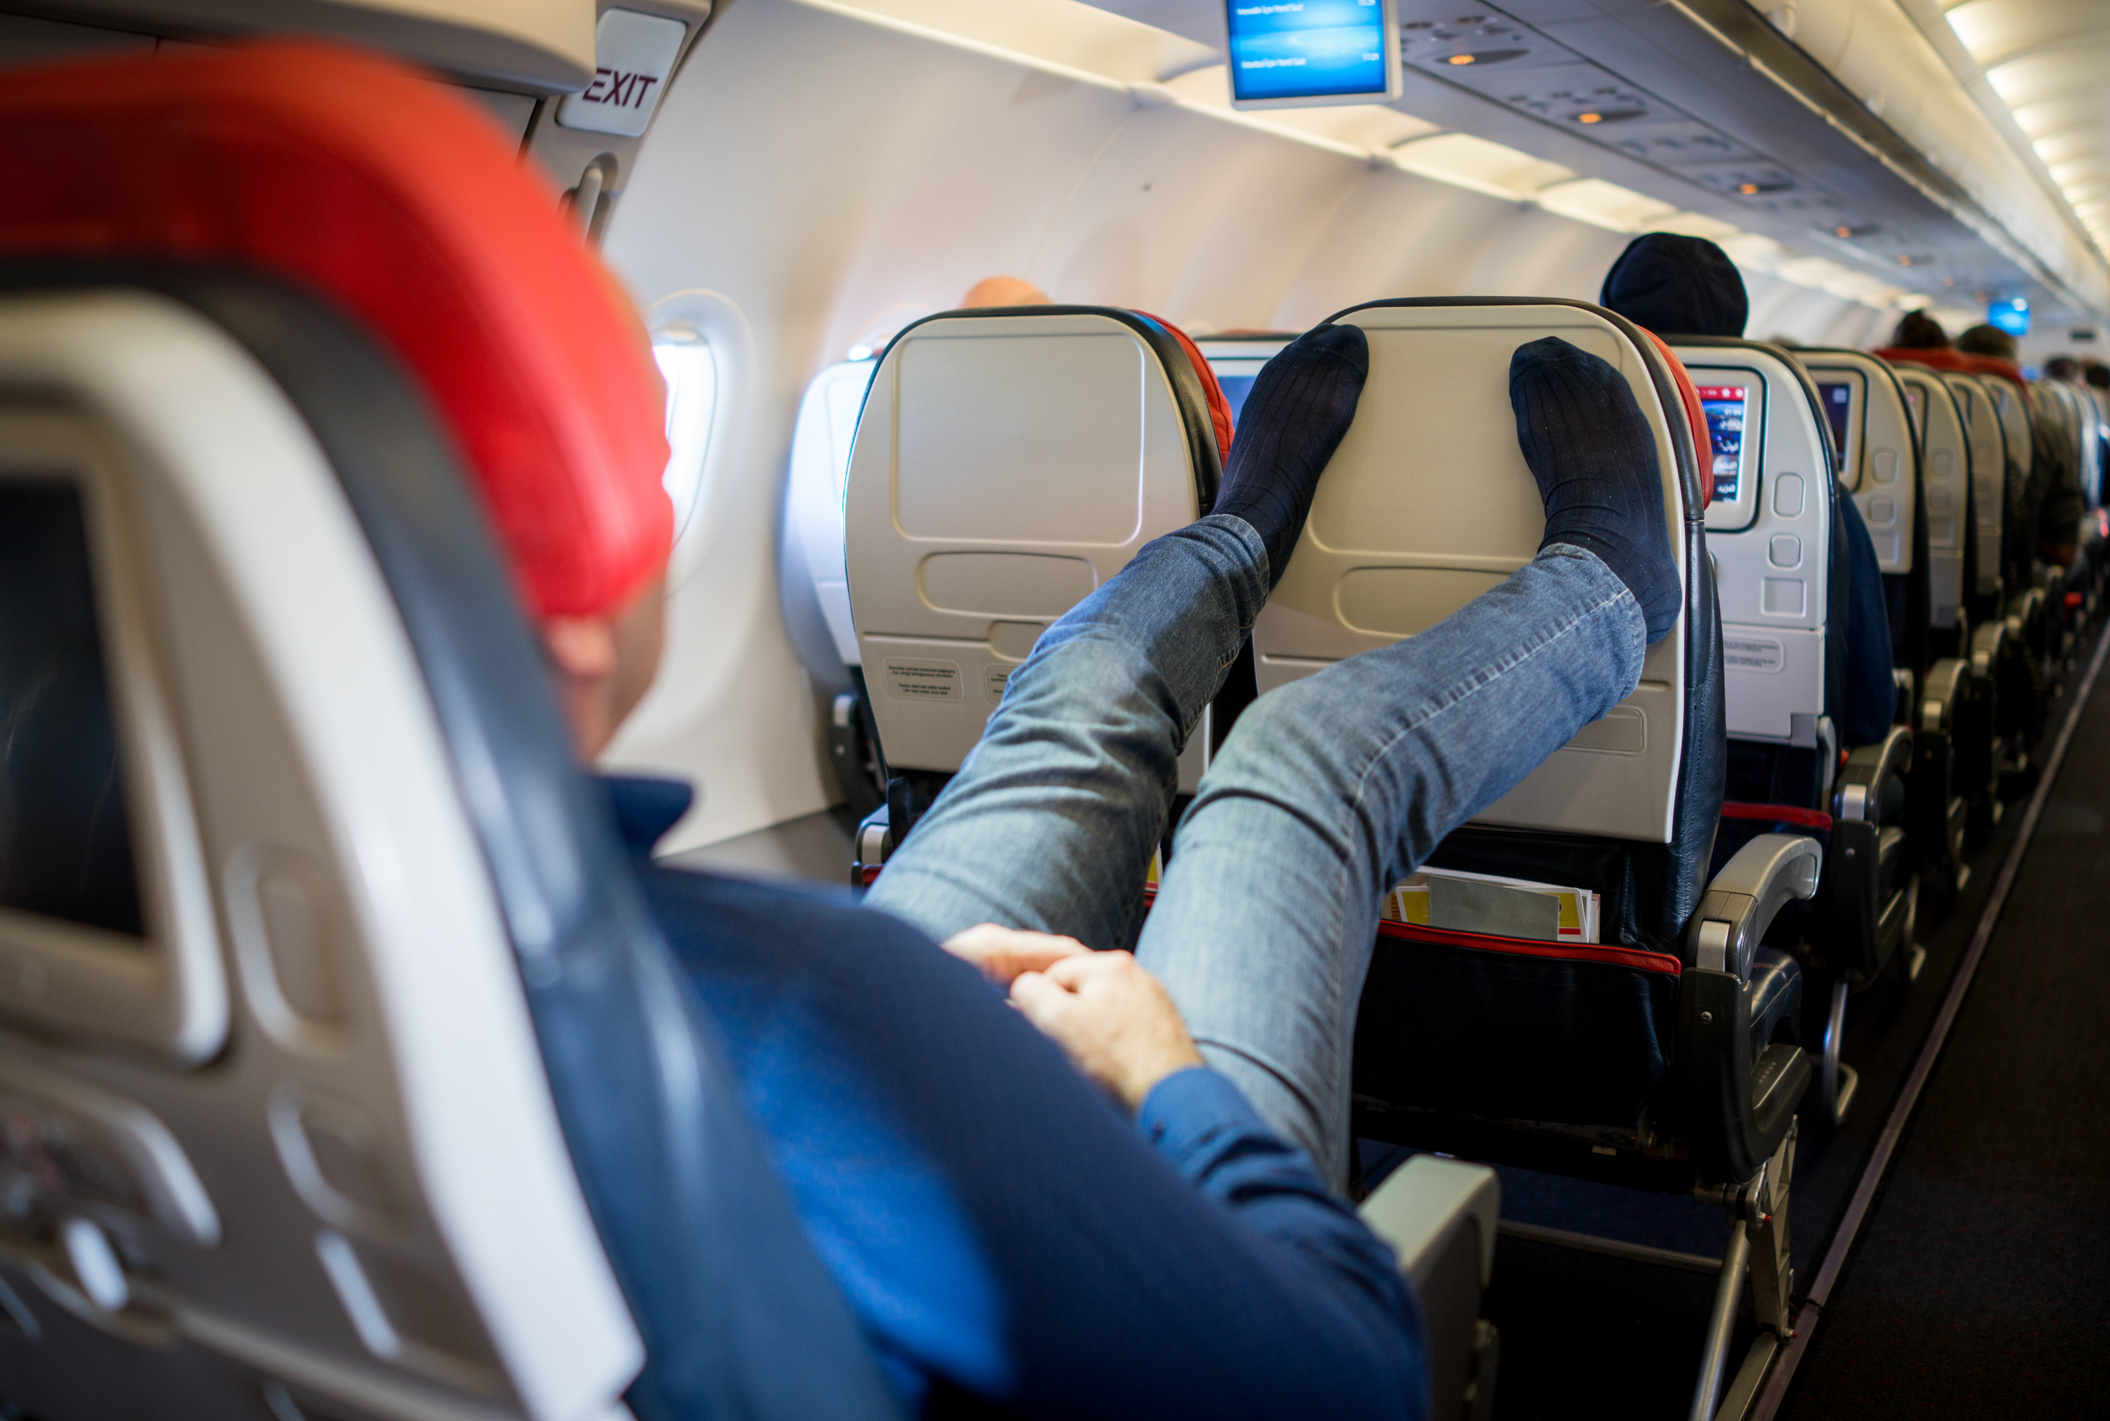 The flight attendant can tell what type of passenger you are by your shoes